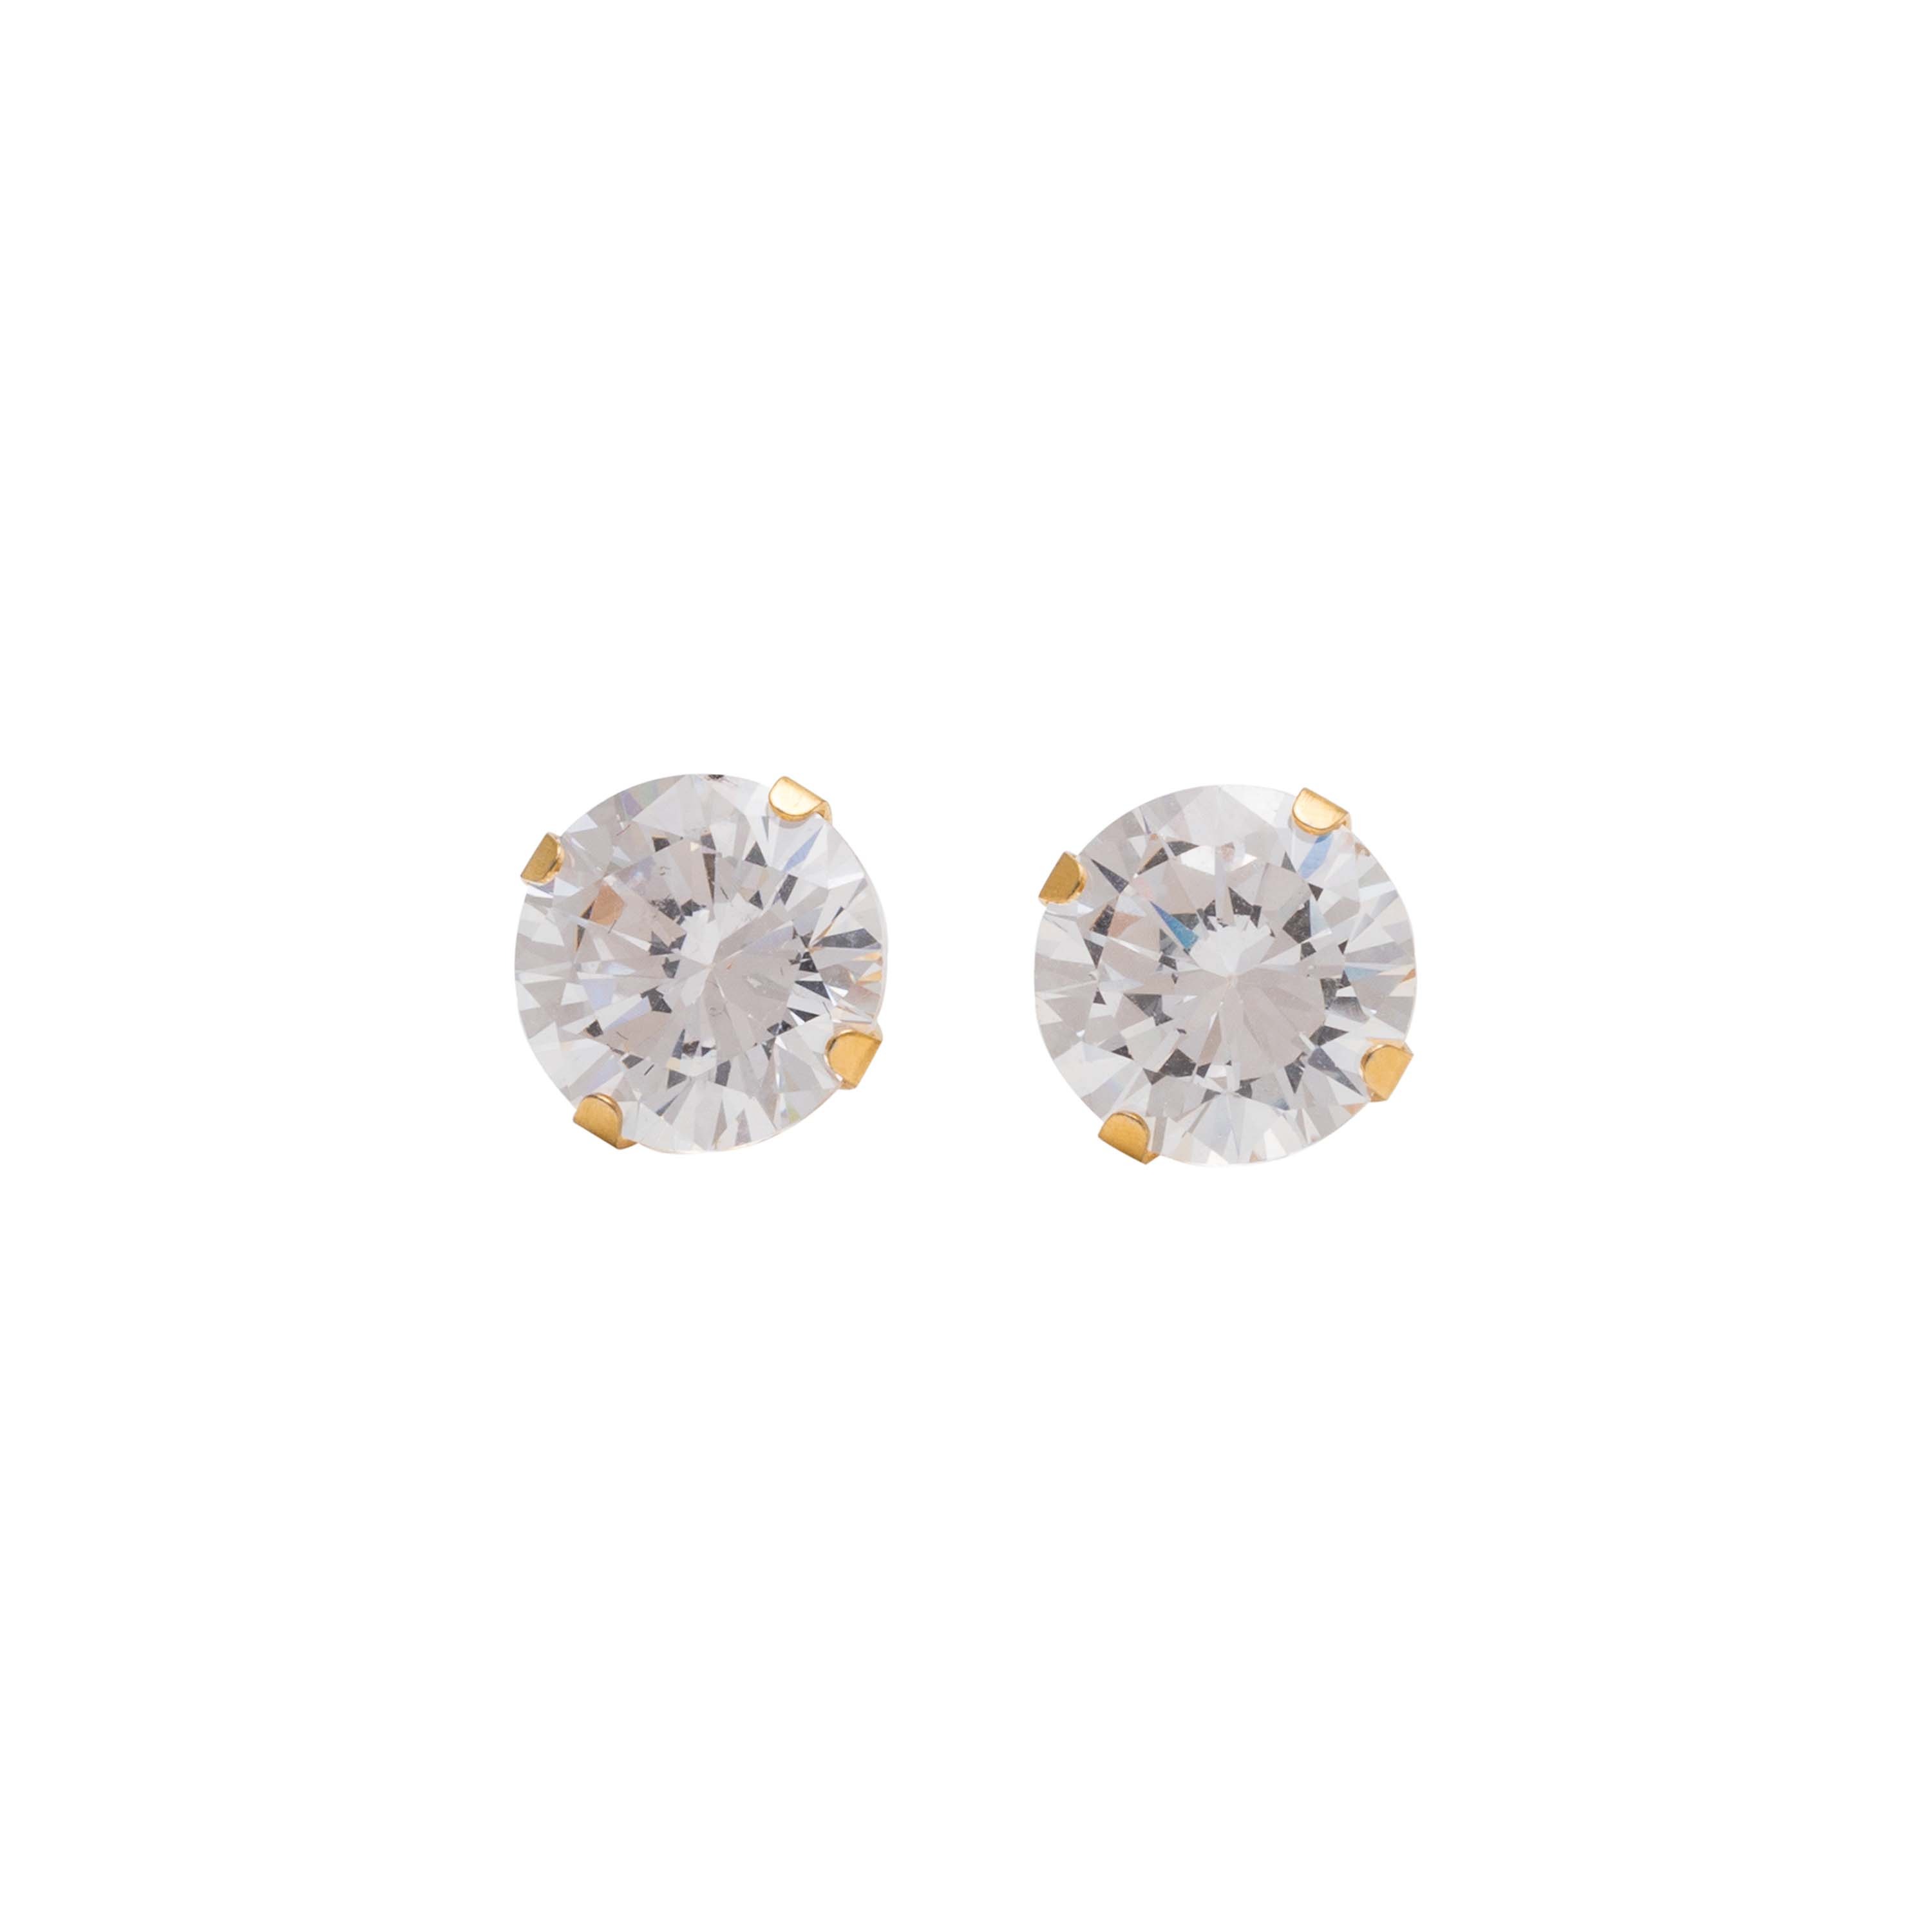 8MM - Cubic Zirconia (Round) - Crystal Clear | 24K Gold Plated Simple Yet Stylish, Cute & Trending Fashion Earrings / Ear Studs for Girls & Women Online @ Pakistan | Studex Sensitive (for daily wear)